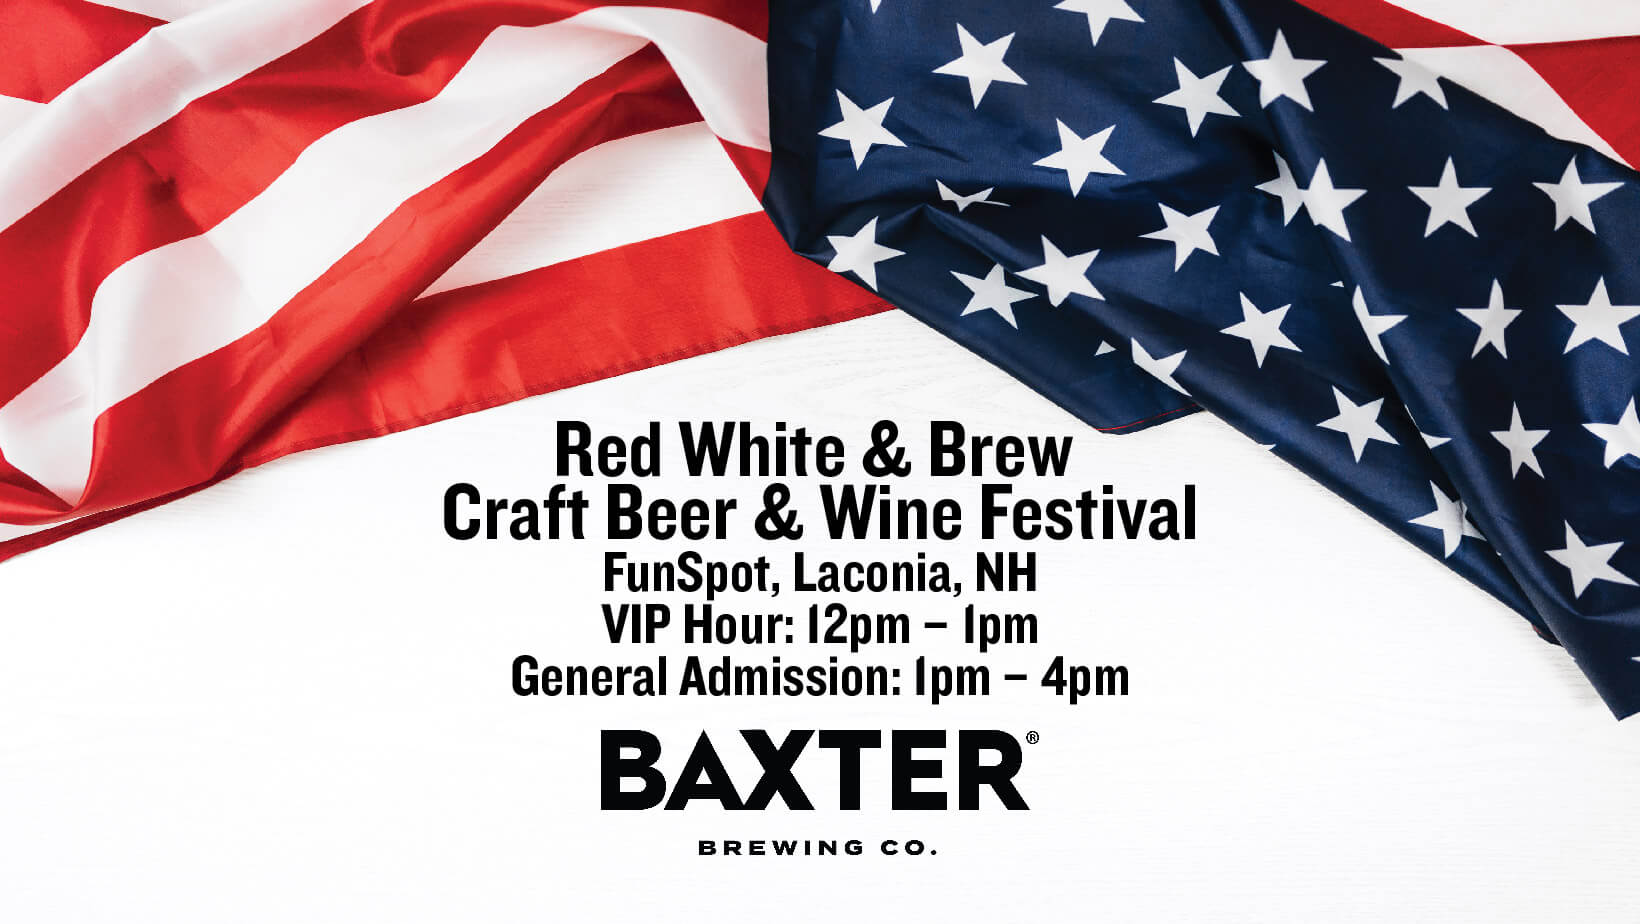 image promoting the Red. White and Brew beer festival that we will be pouring at September 30th